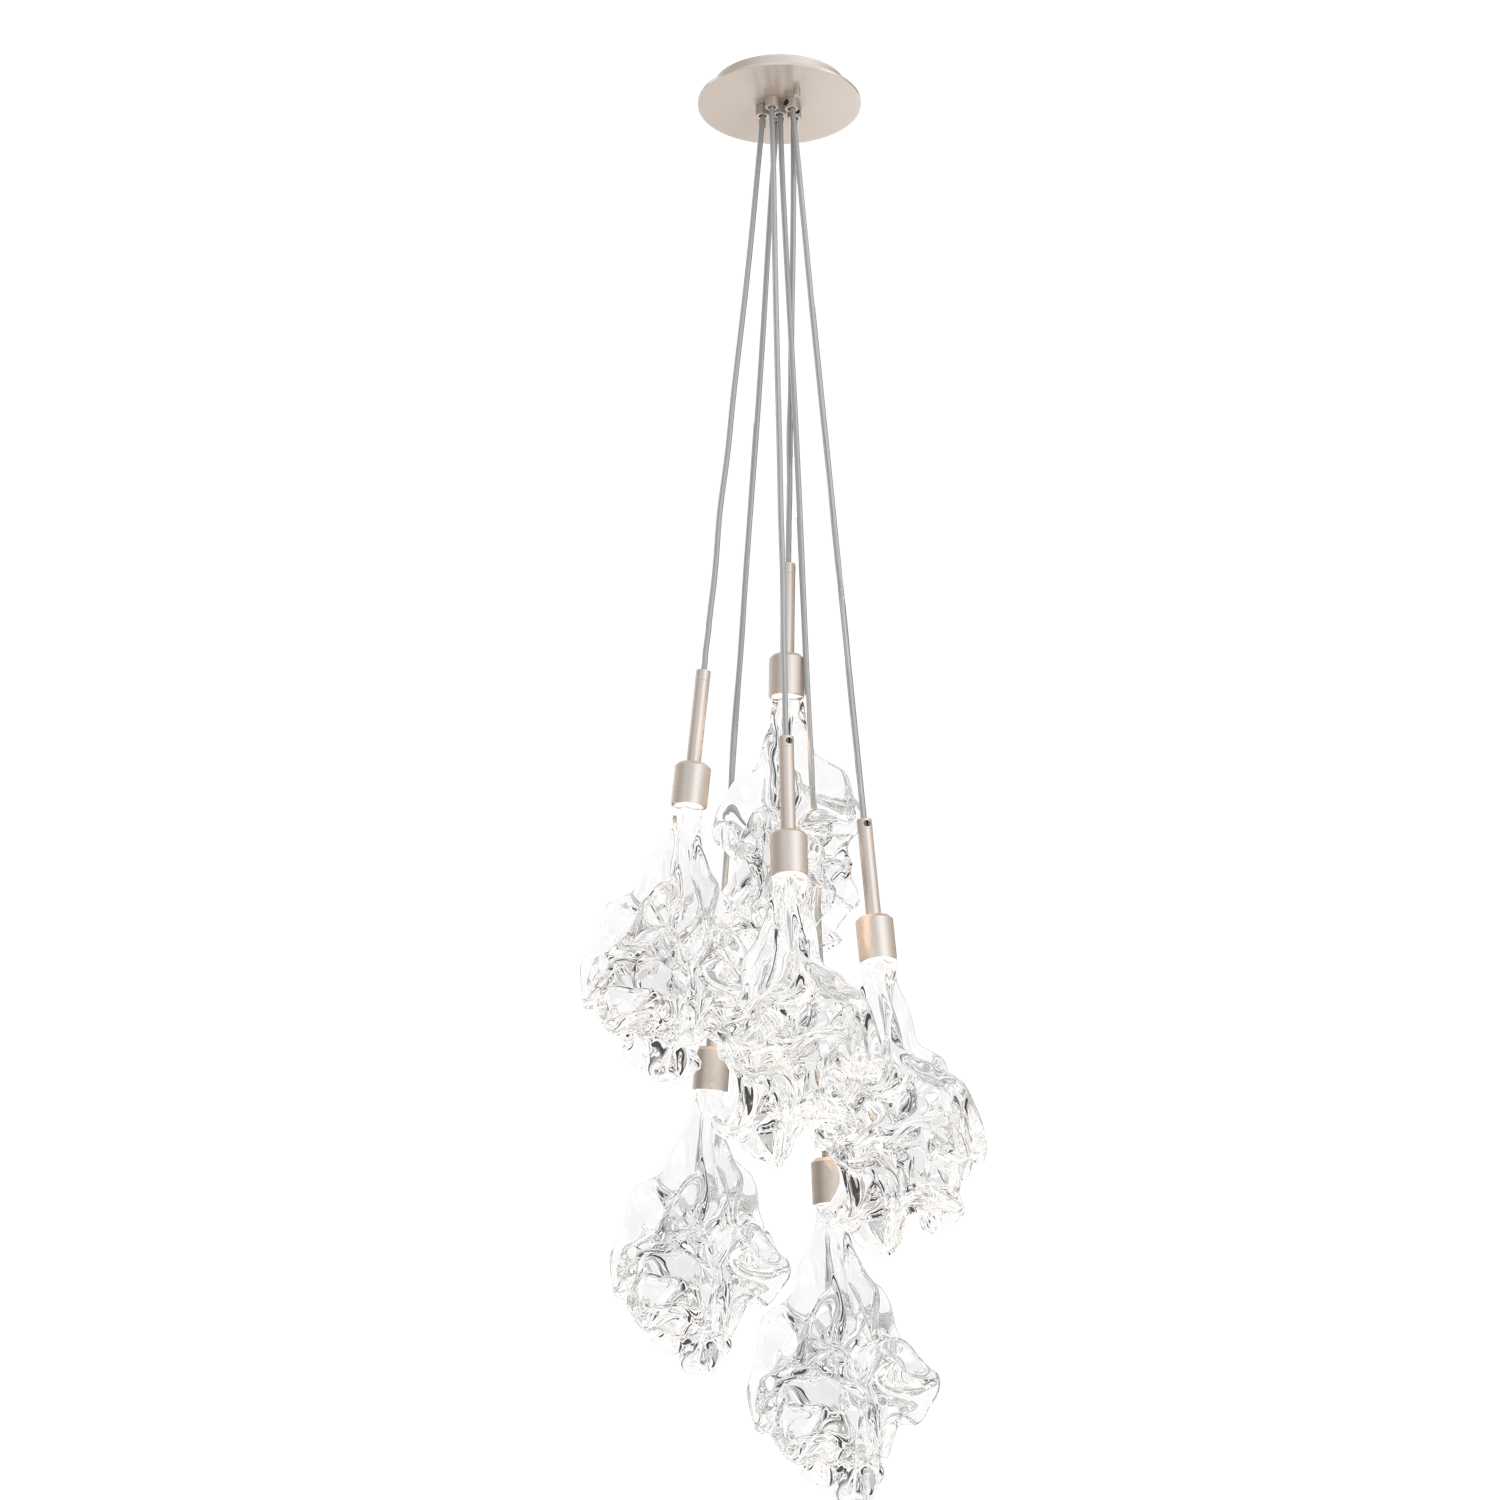 LAB0059-0B-BS-Hammerton-Studio-Blossom-6-light-cluster-pendant-light-with-metallic-beige-silver-finish-and-clear-handblown-crystal-glass-shades-and-LED-lamping